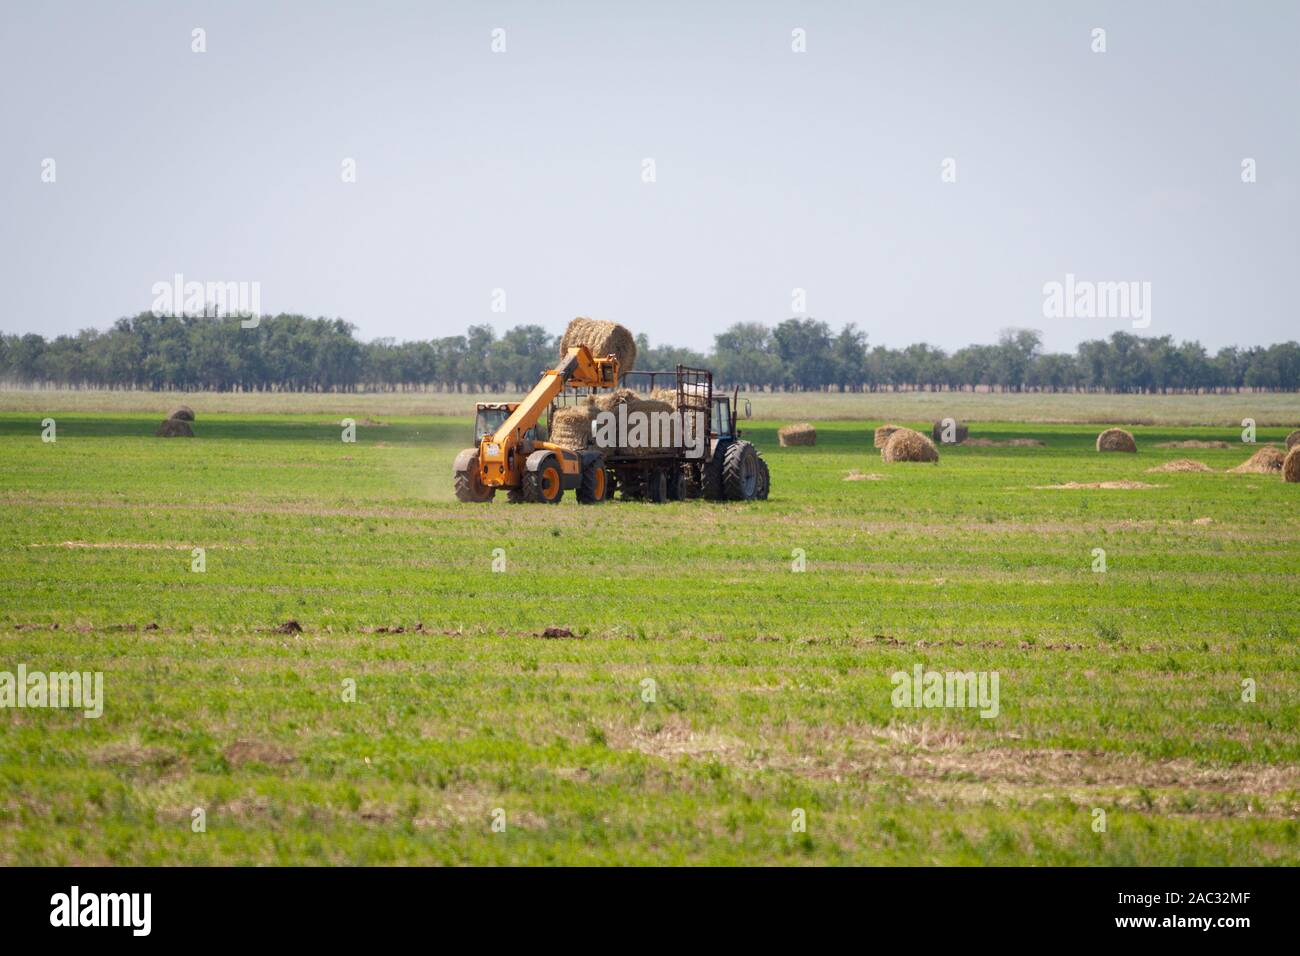 An agricultural tractor loader loads bales of hay into a tractor trailer on the field Stock Photo